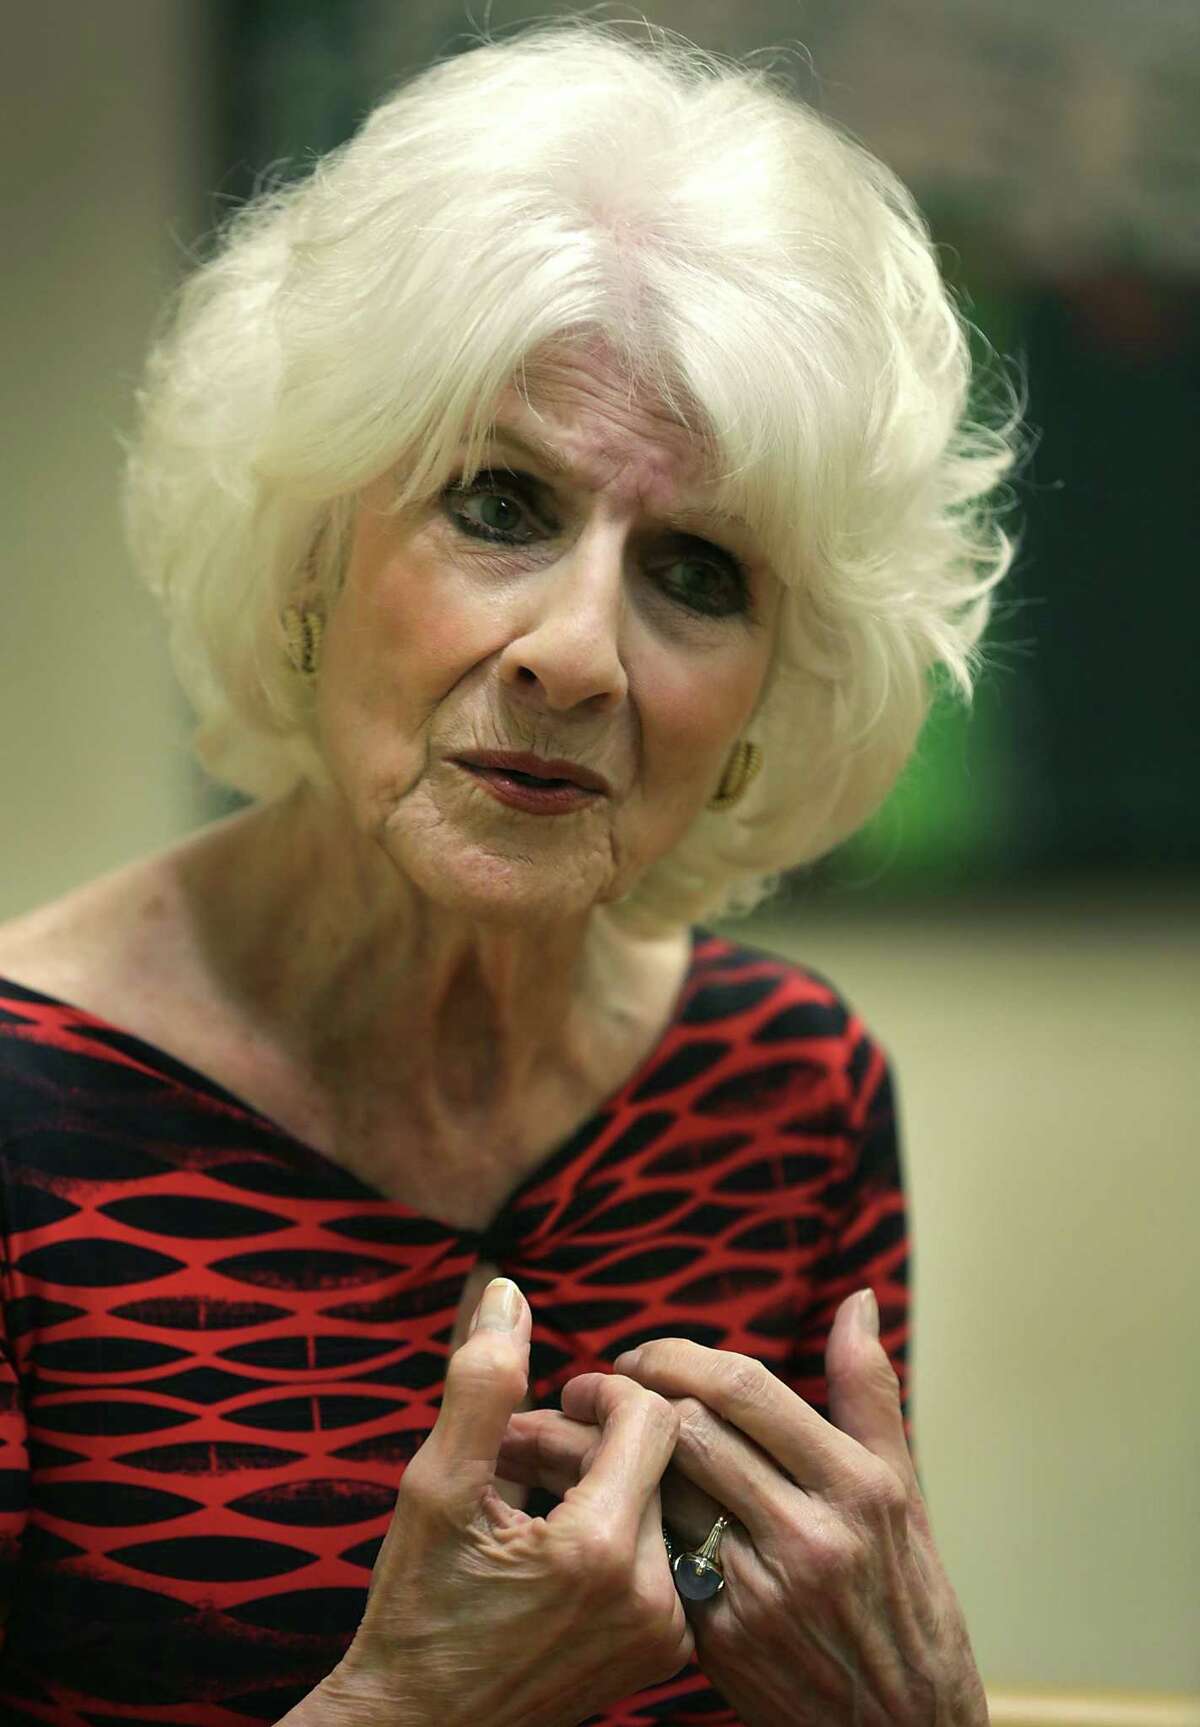 Diane Rehm is off the radio but still active